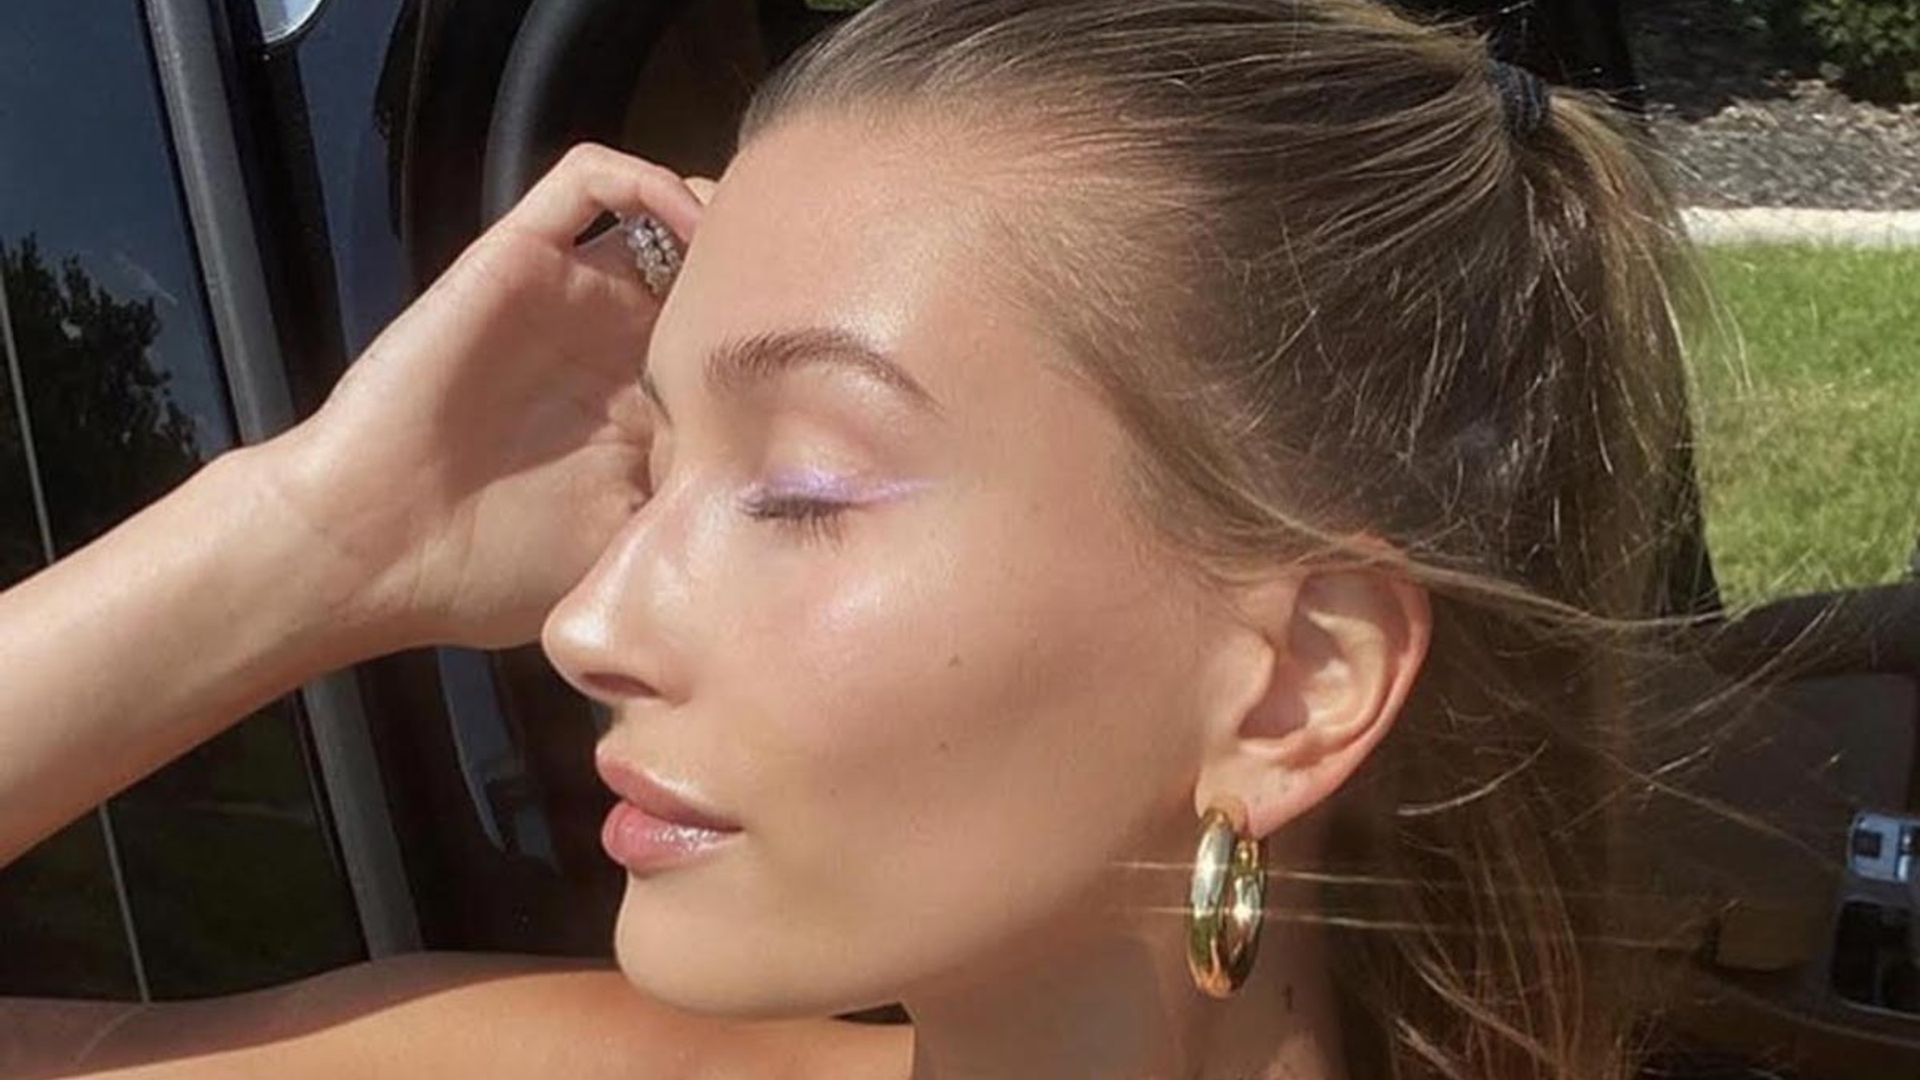 Hailey Bieber swears by her ice facial roller to depuff skin - shop Amazon's top-rated